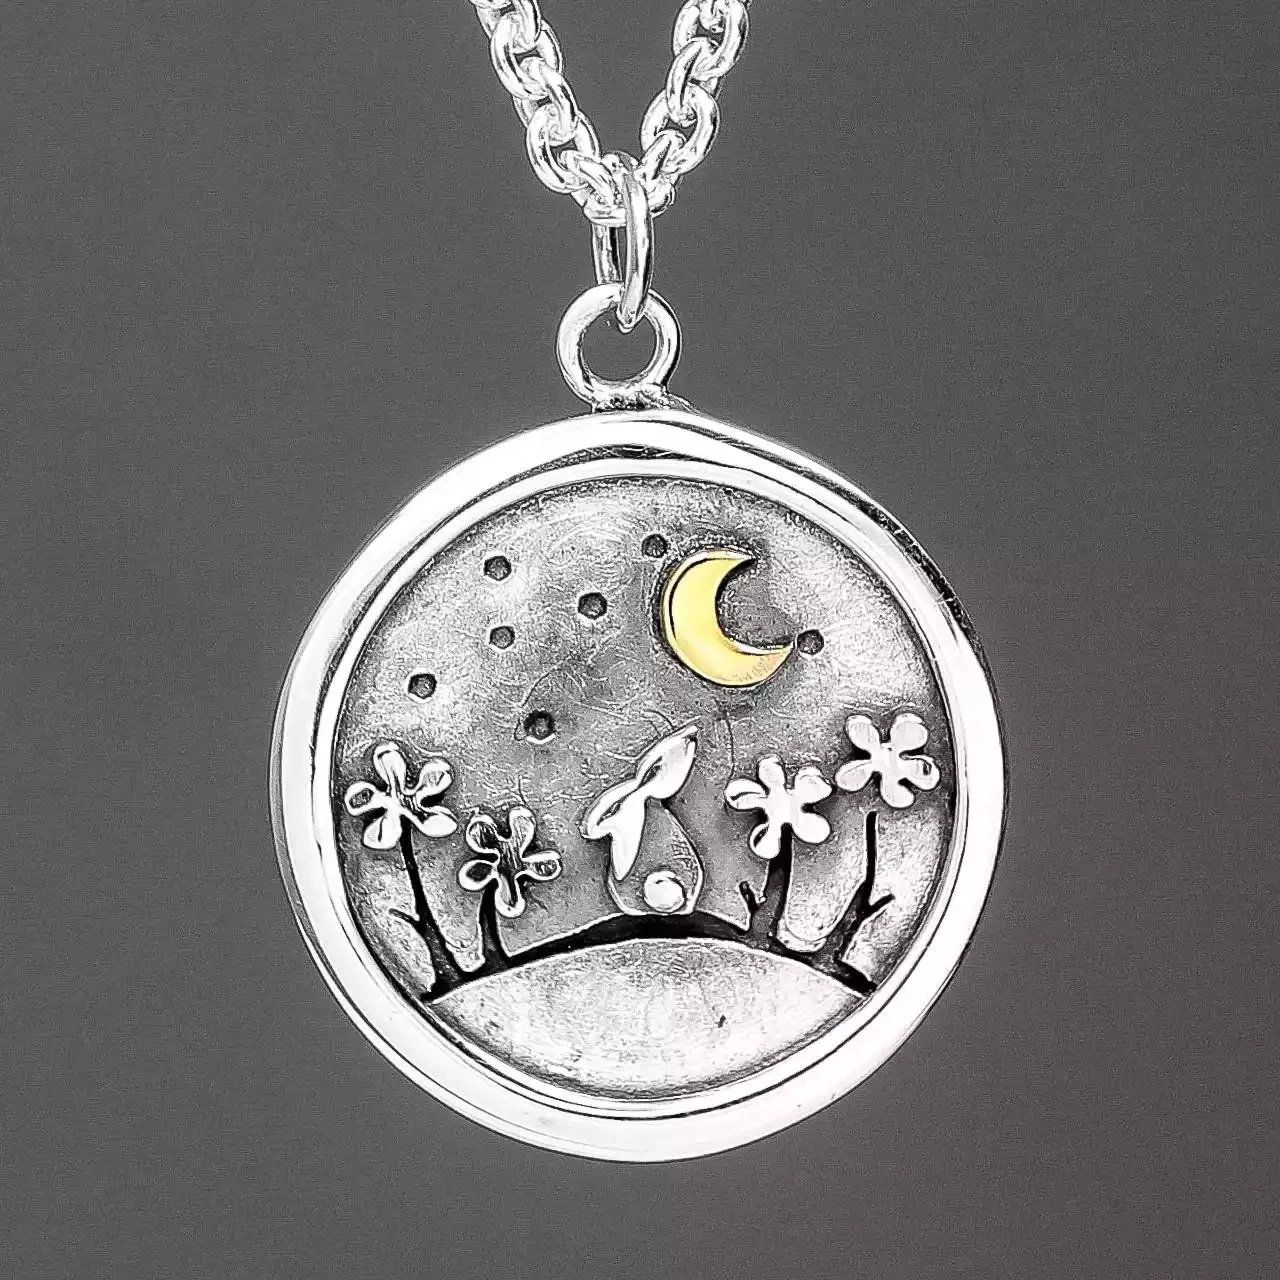 Moongazing Hare in Meadow Silver and Gold Pendant - Small by Linda Macdonald